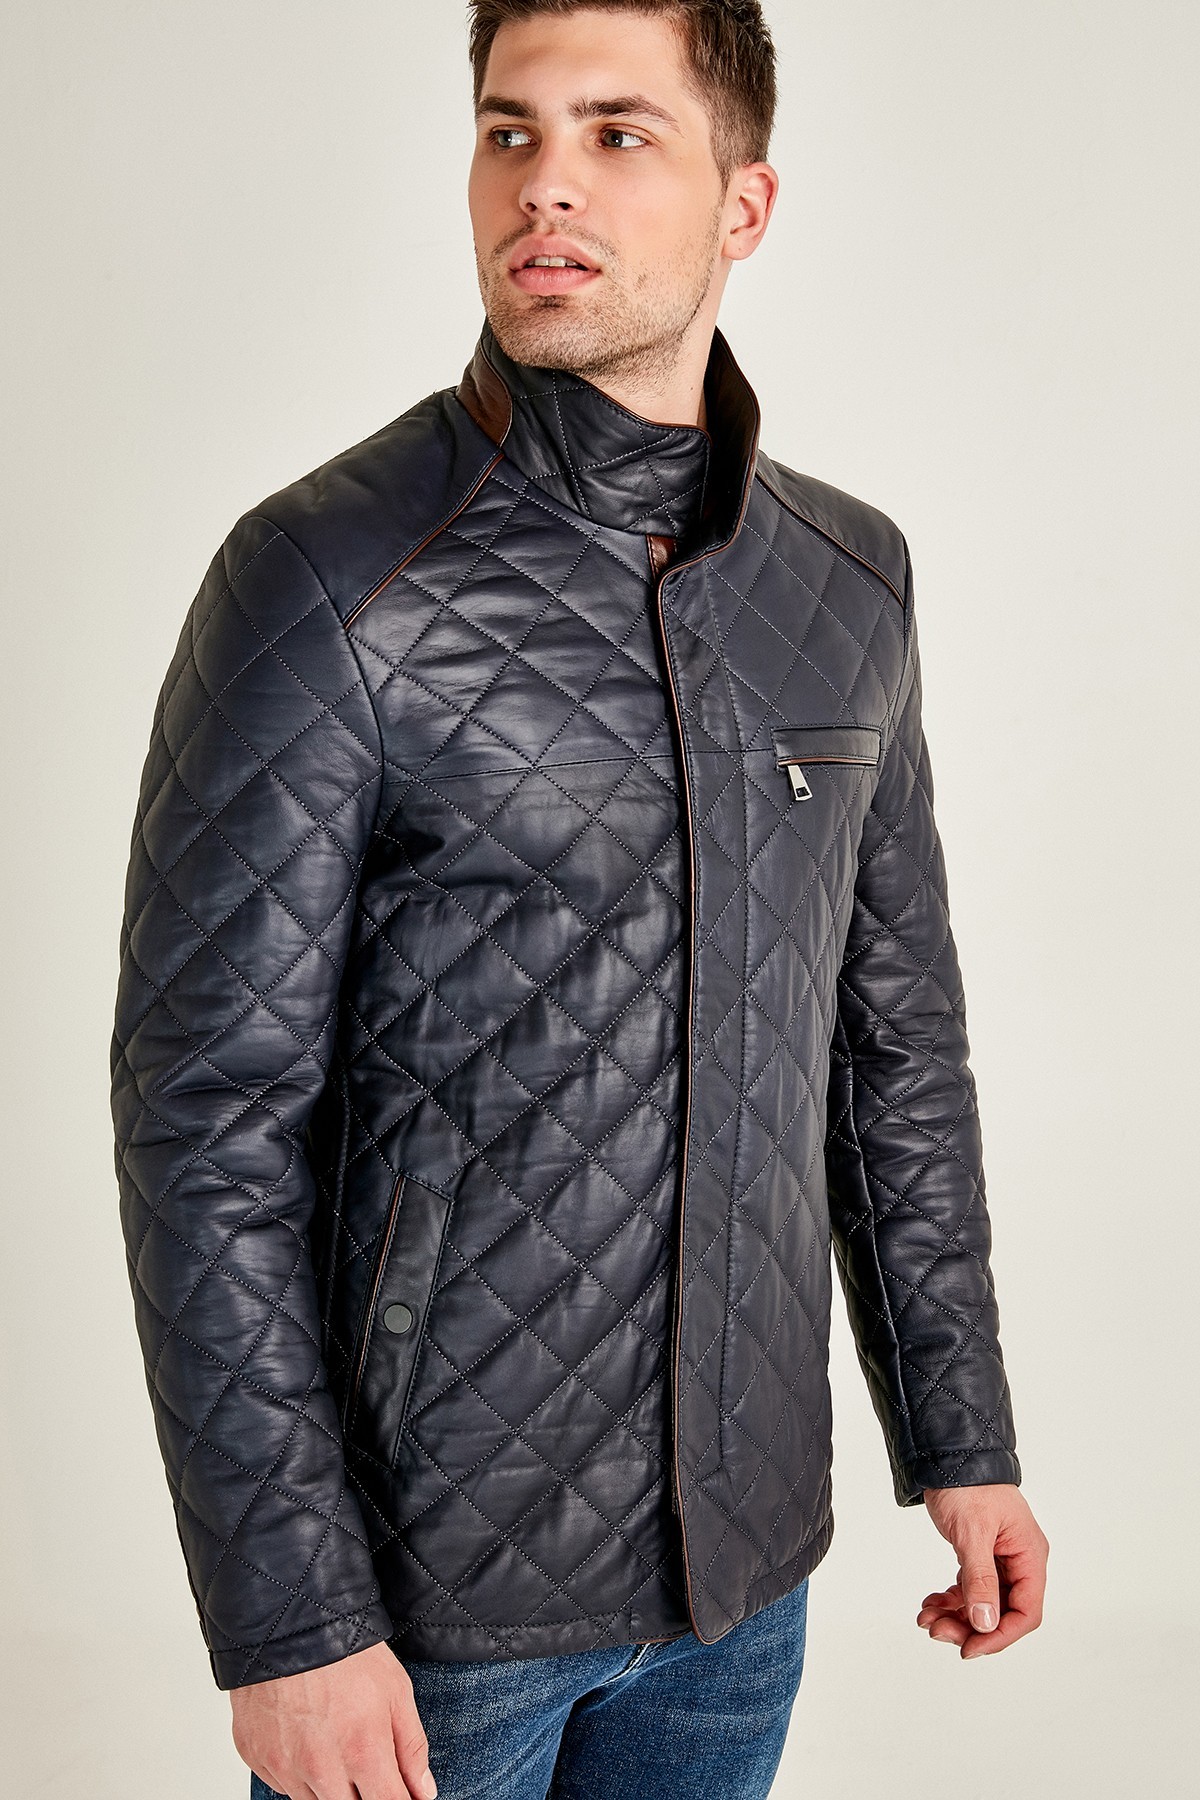 Navy Blue Men's Jacket | Best Quilted Style Leather Outfits